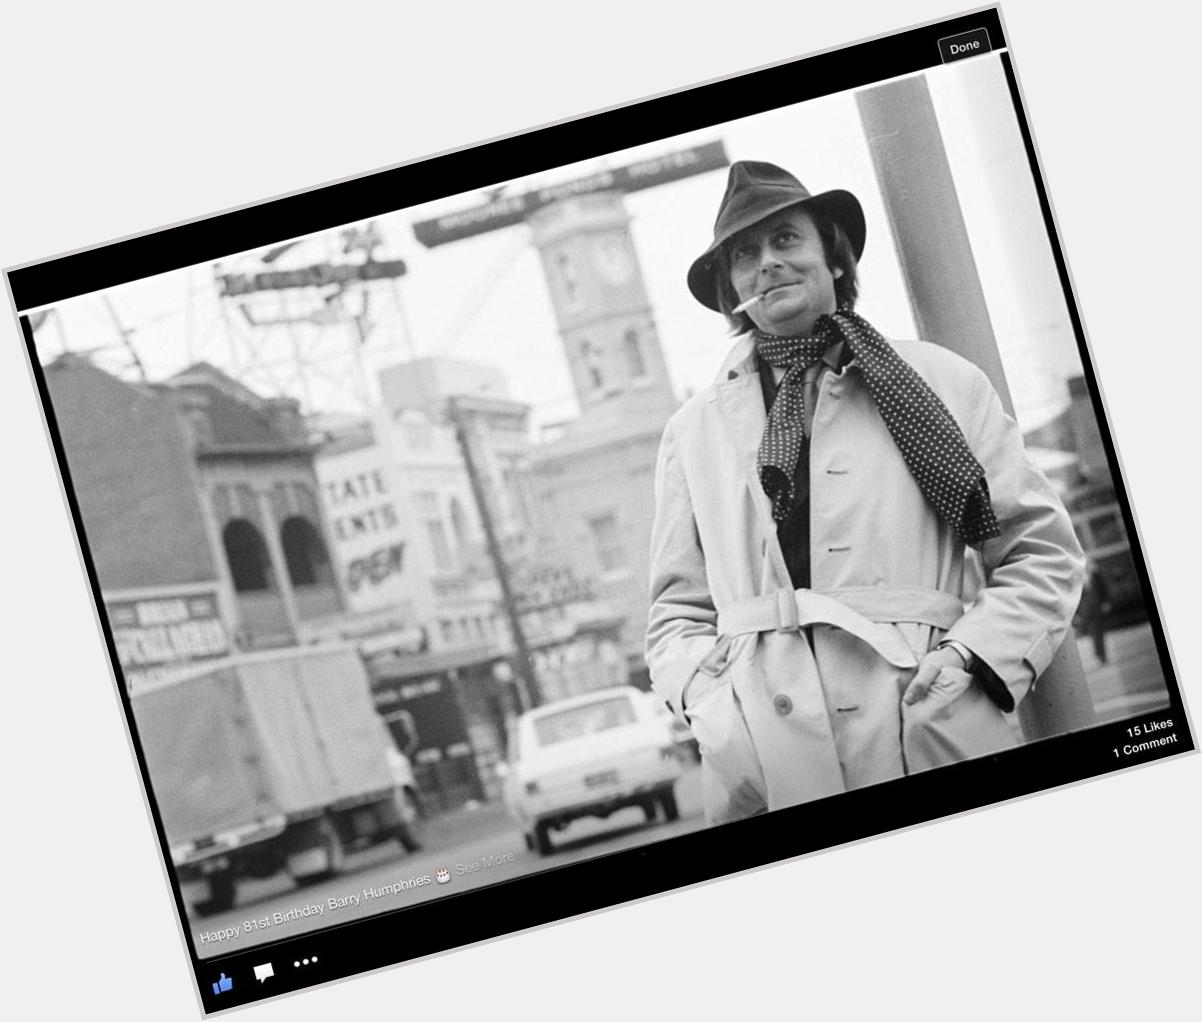 Happy 81st Birthday Barry Humphries. From the collection. Photographer Mark Strizic, 1969. 